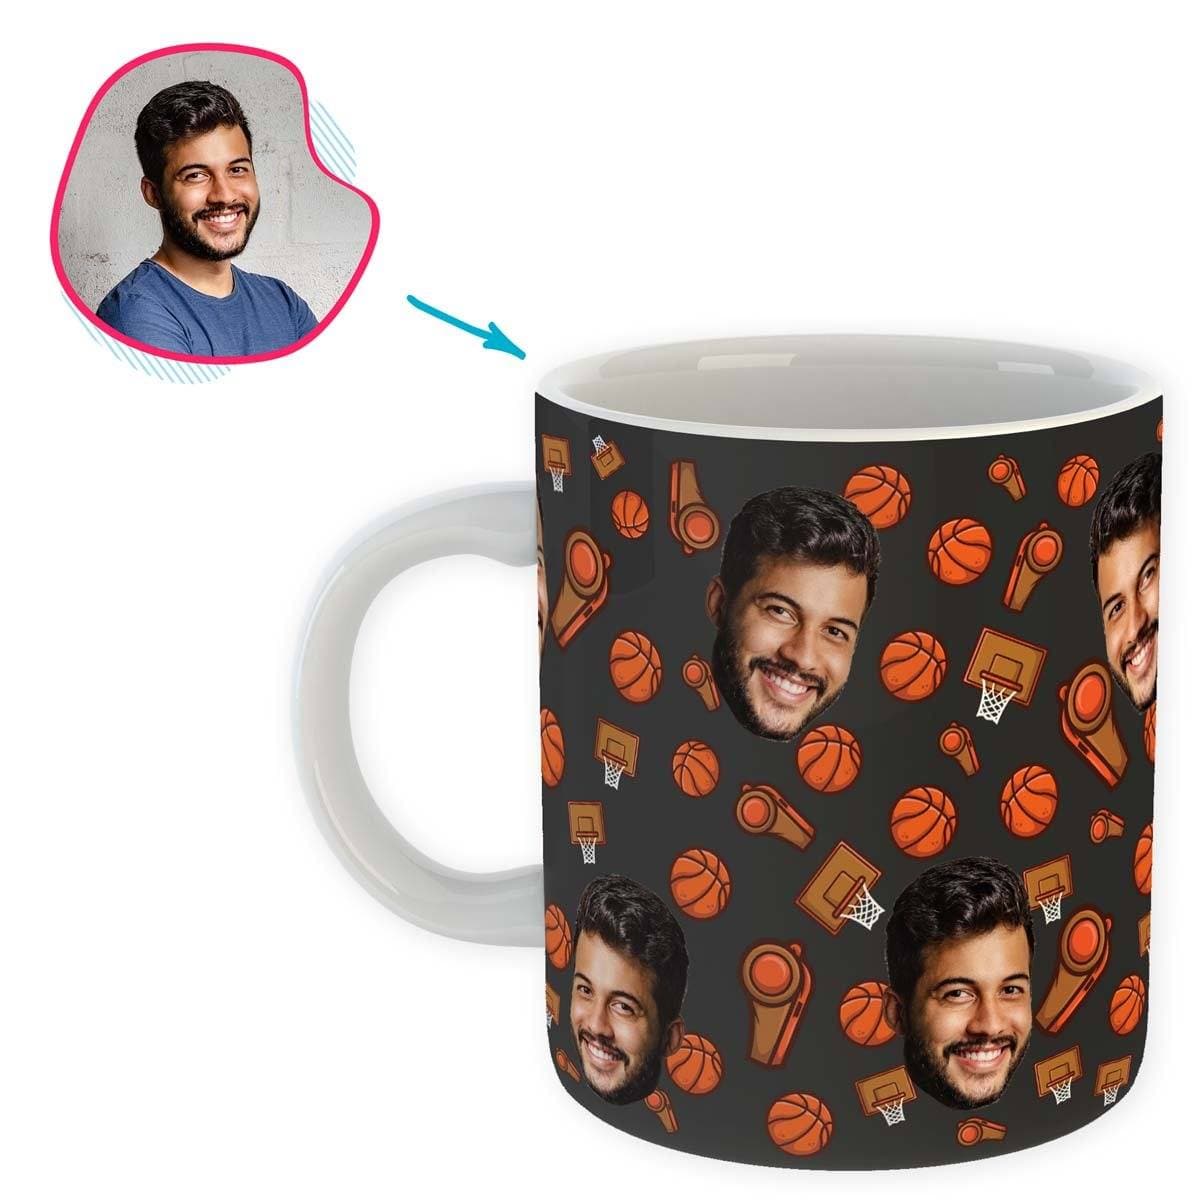 dark Basketball mug personalized with photo of face printed on it